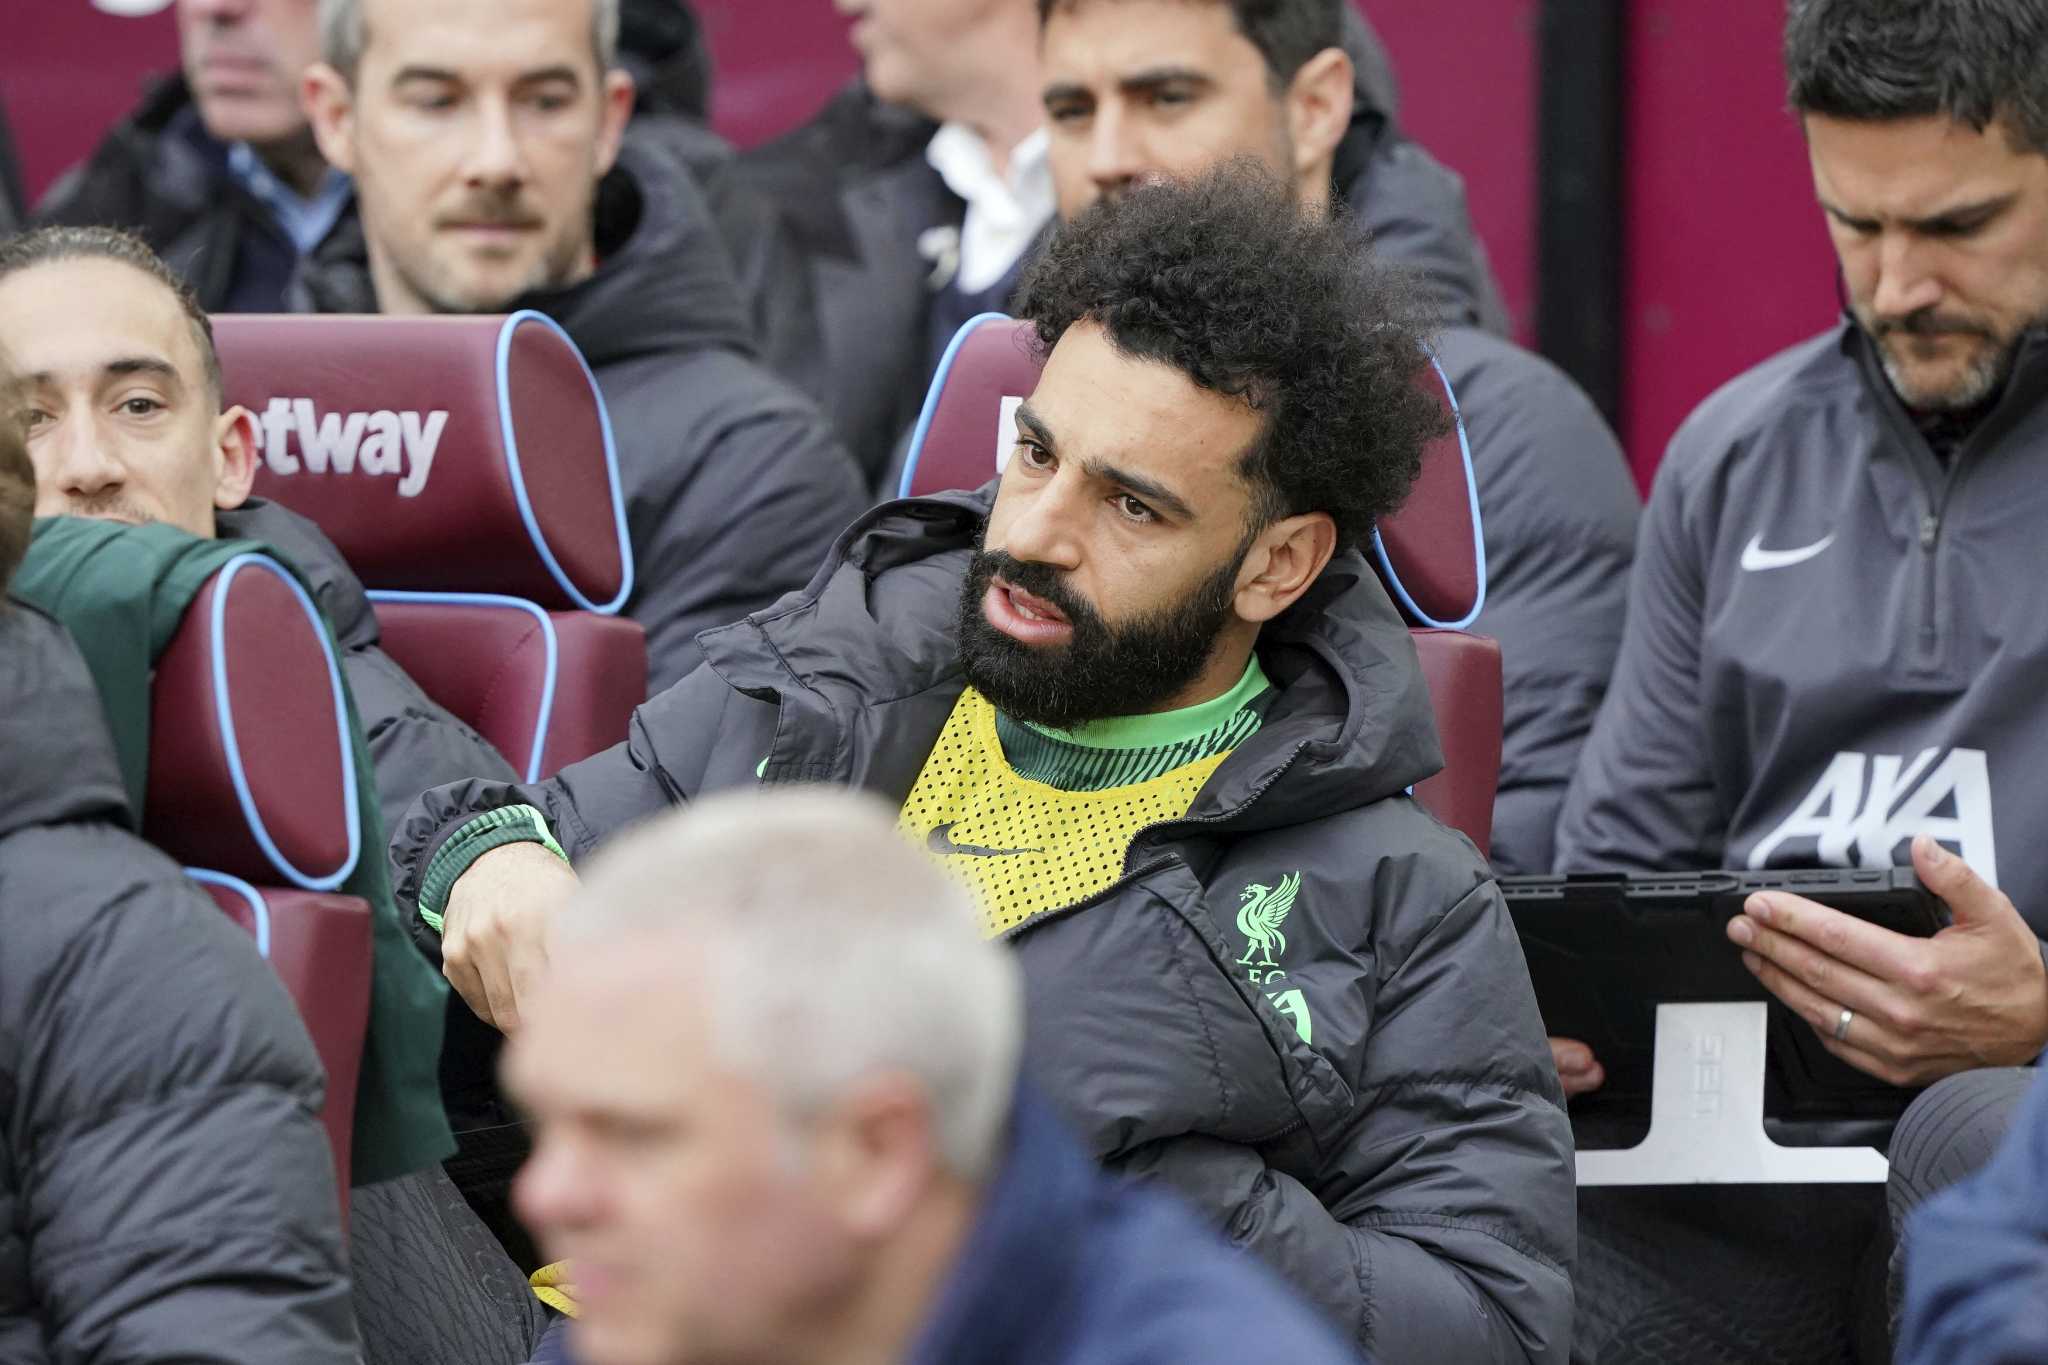 Klopp and Salah involved in touchline spat during Liverpool's draw at West Ham in Premier League